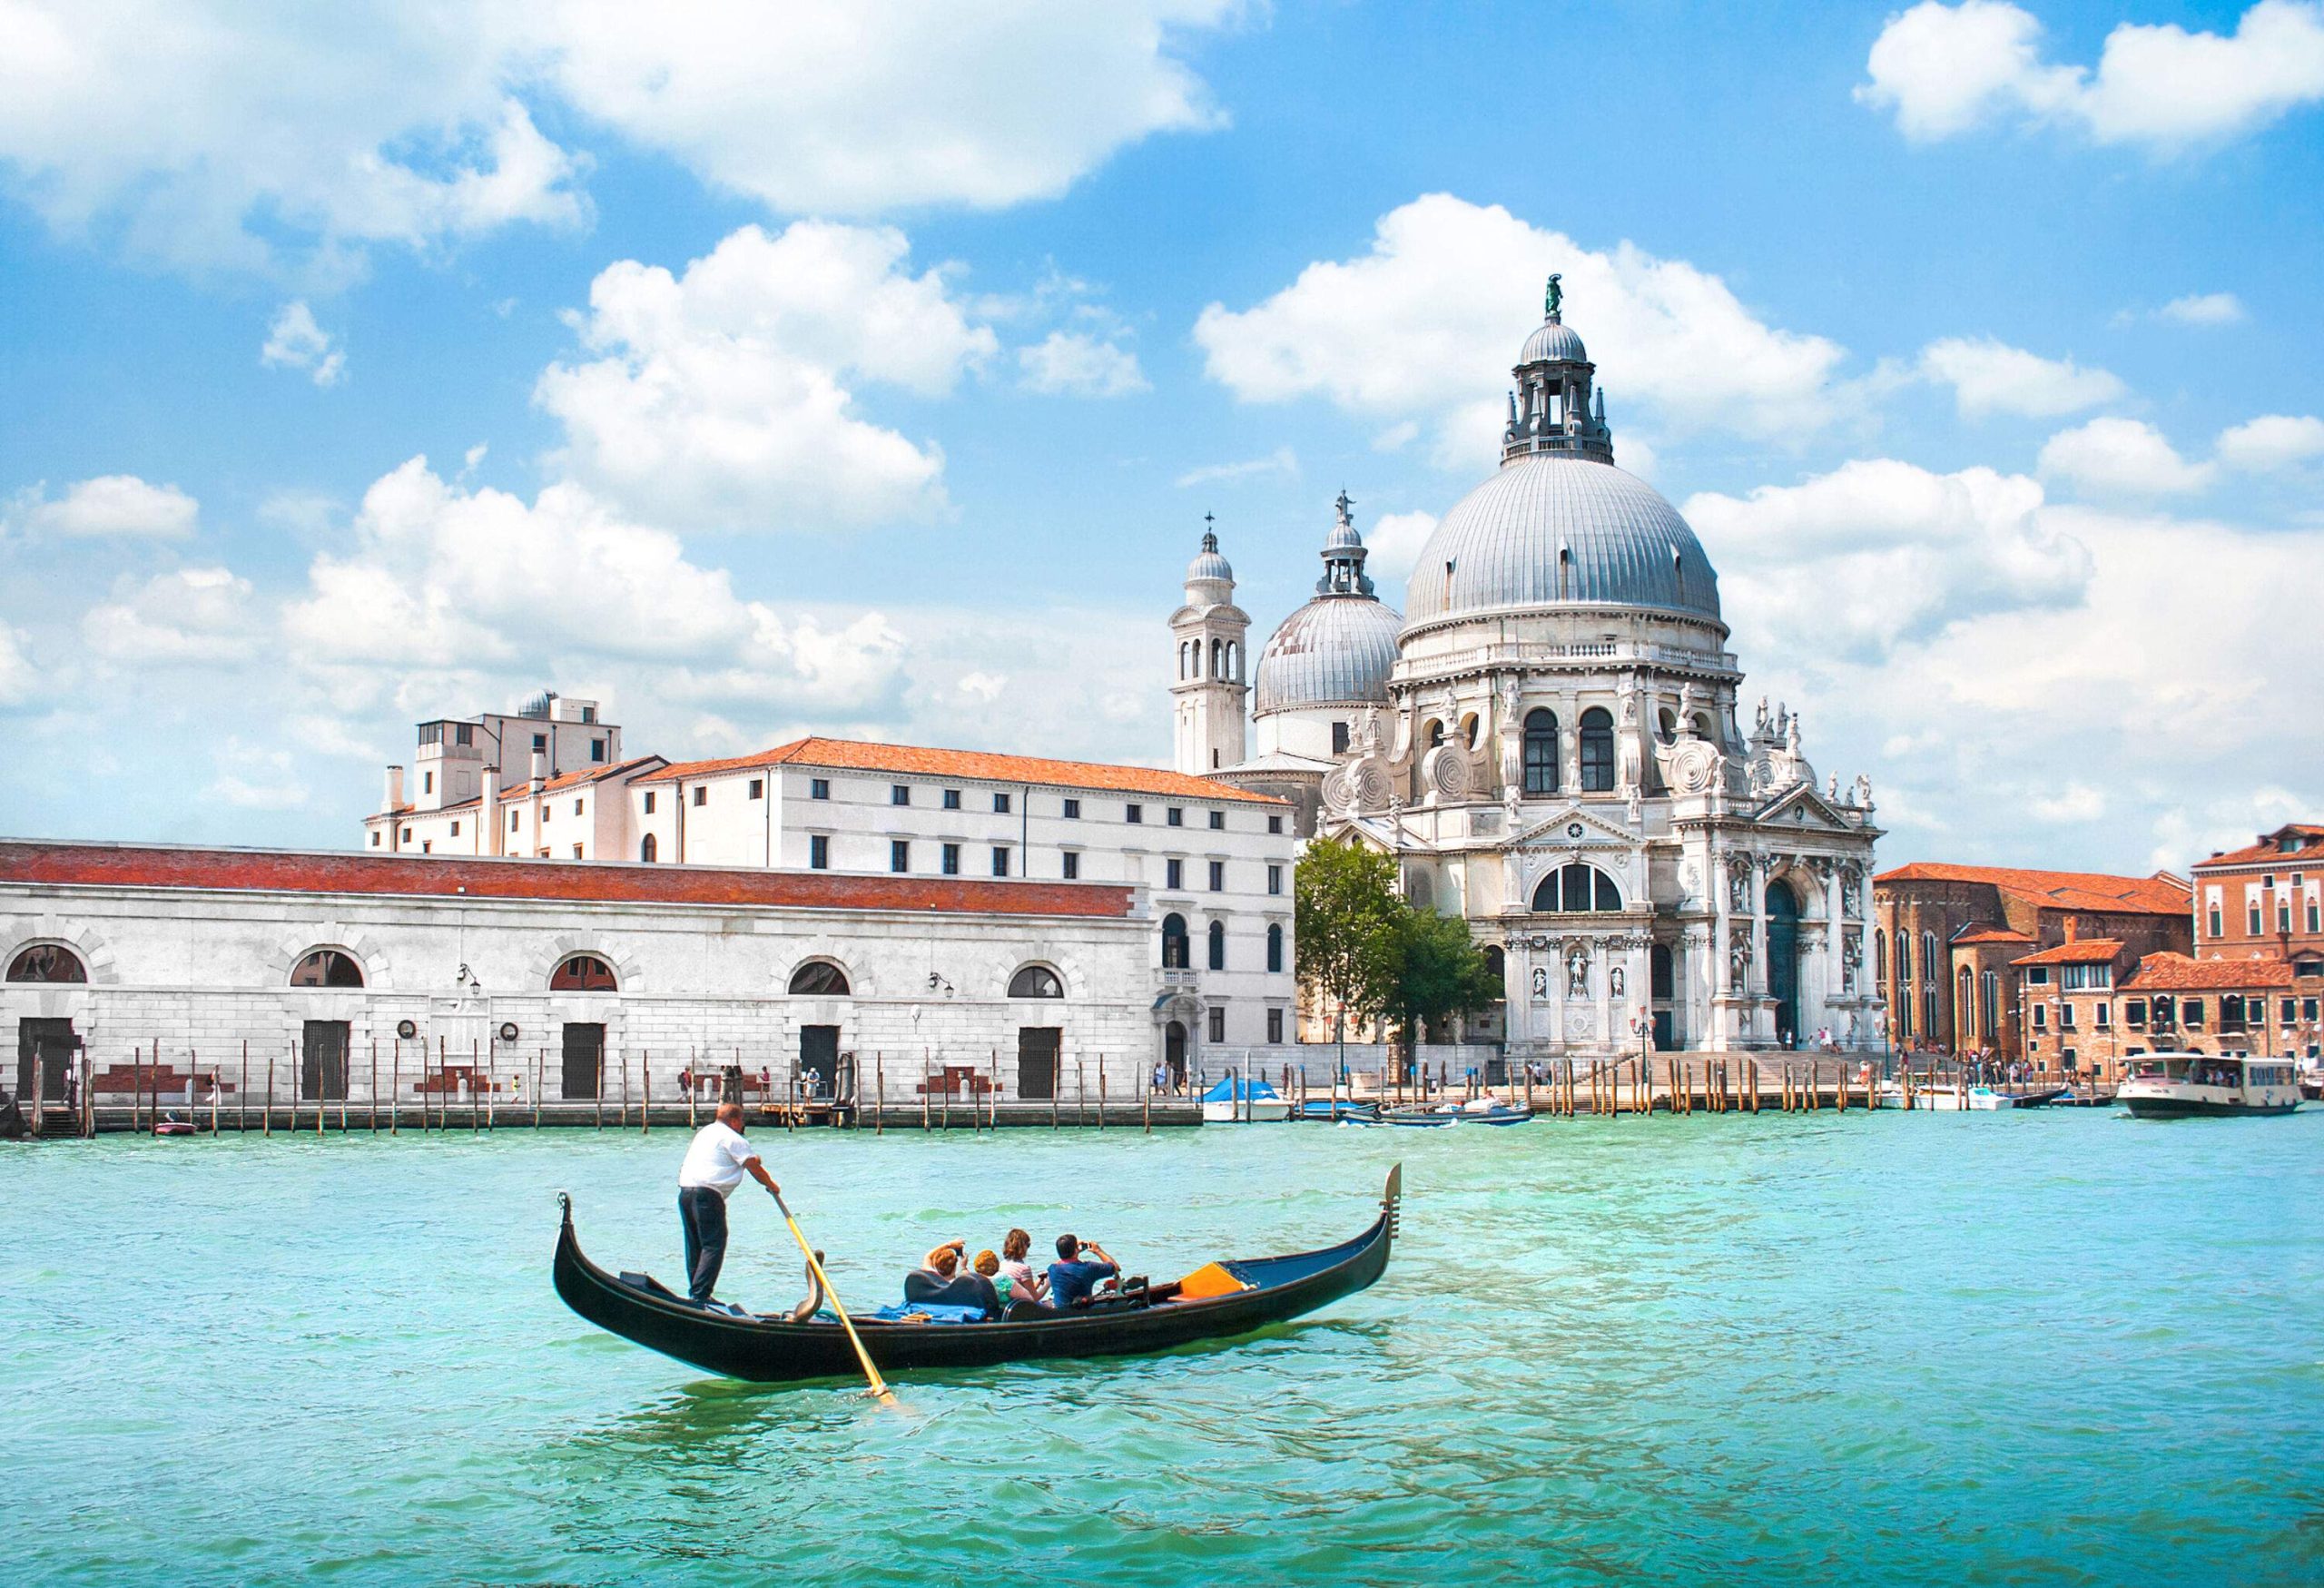 A gondola carrying people on Canal Grande with the Basilica di Santa Maria della Salute visible in the background.